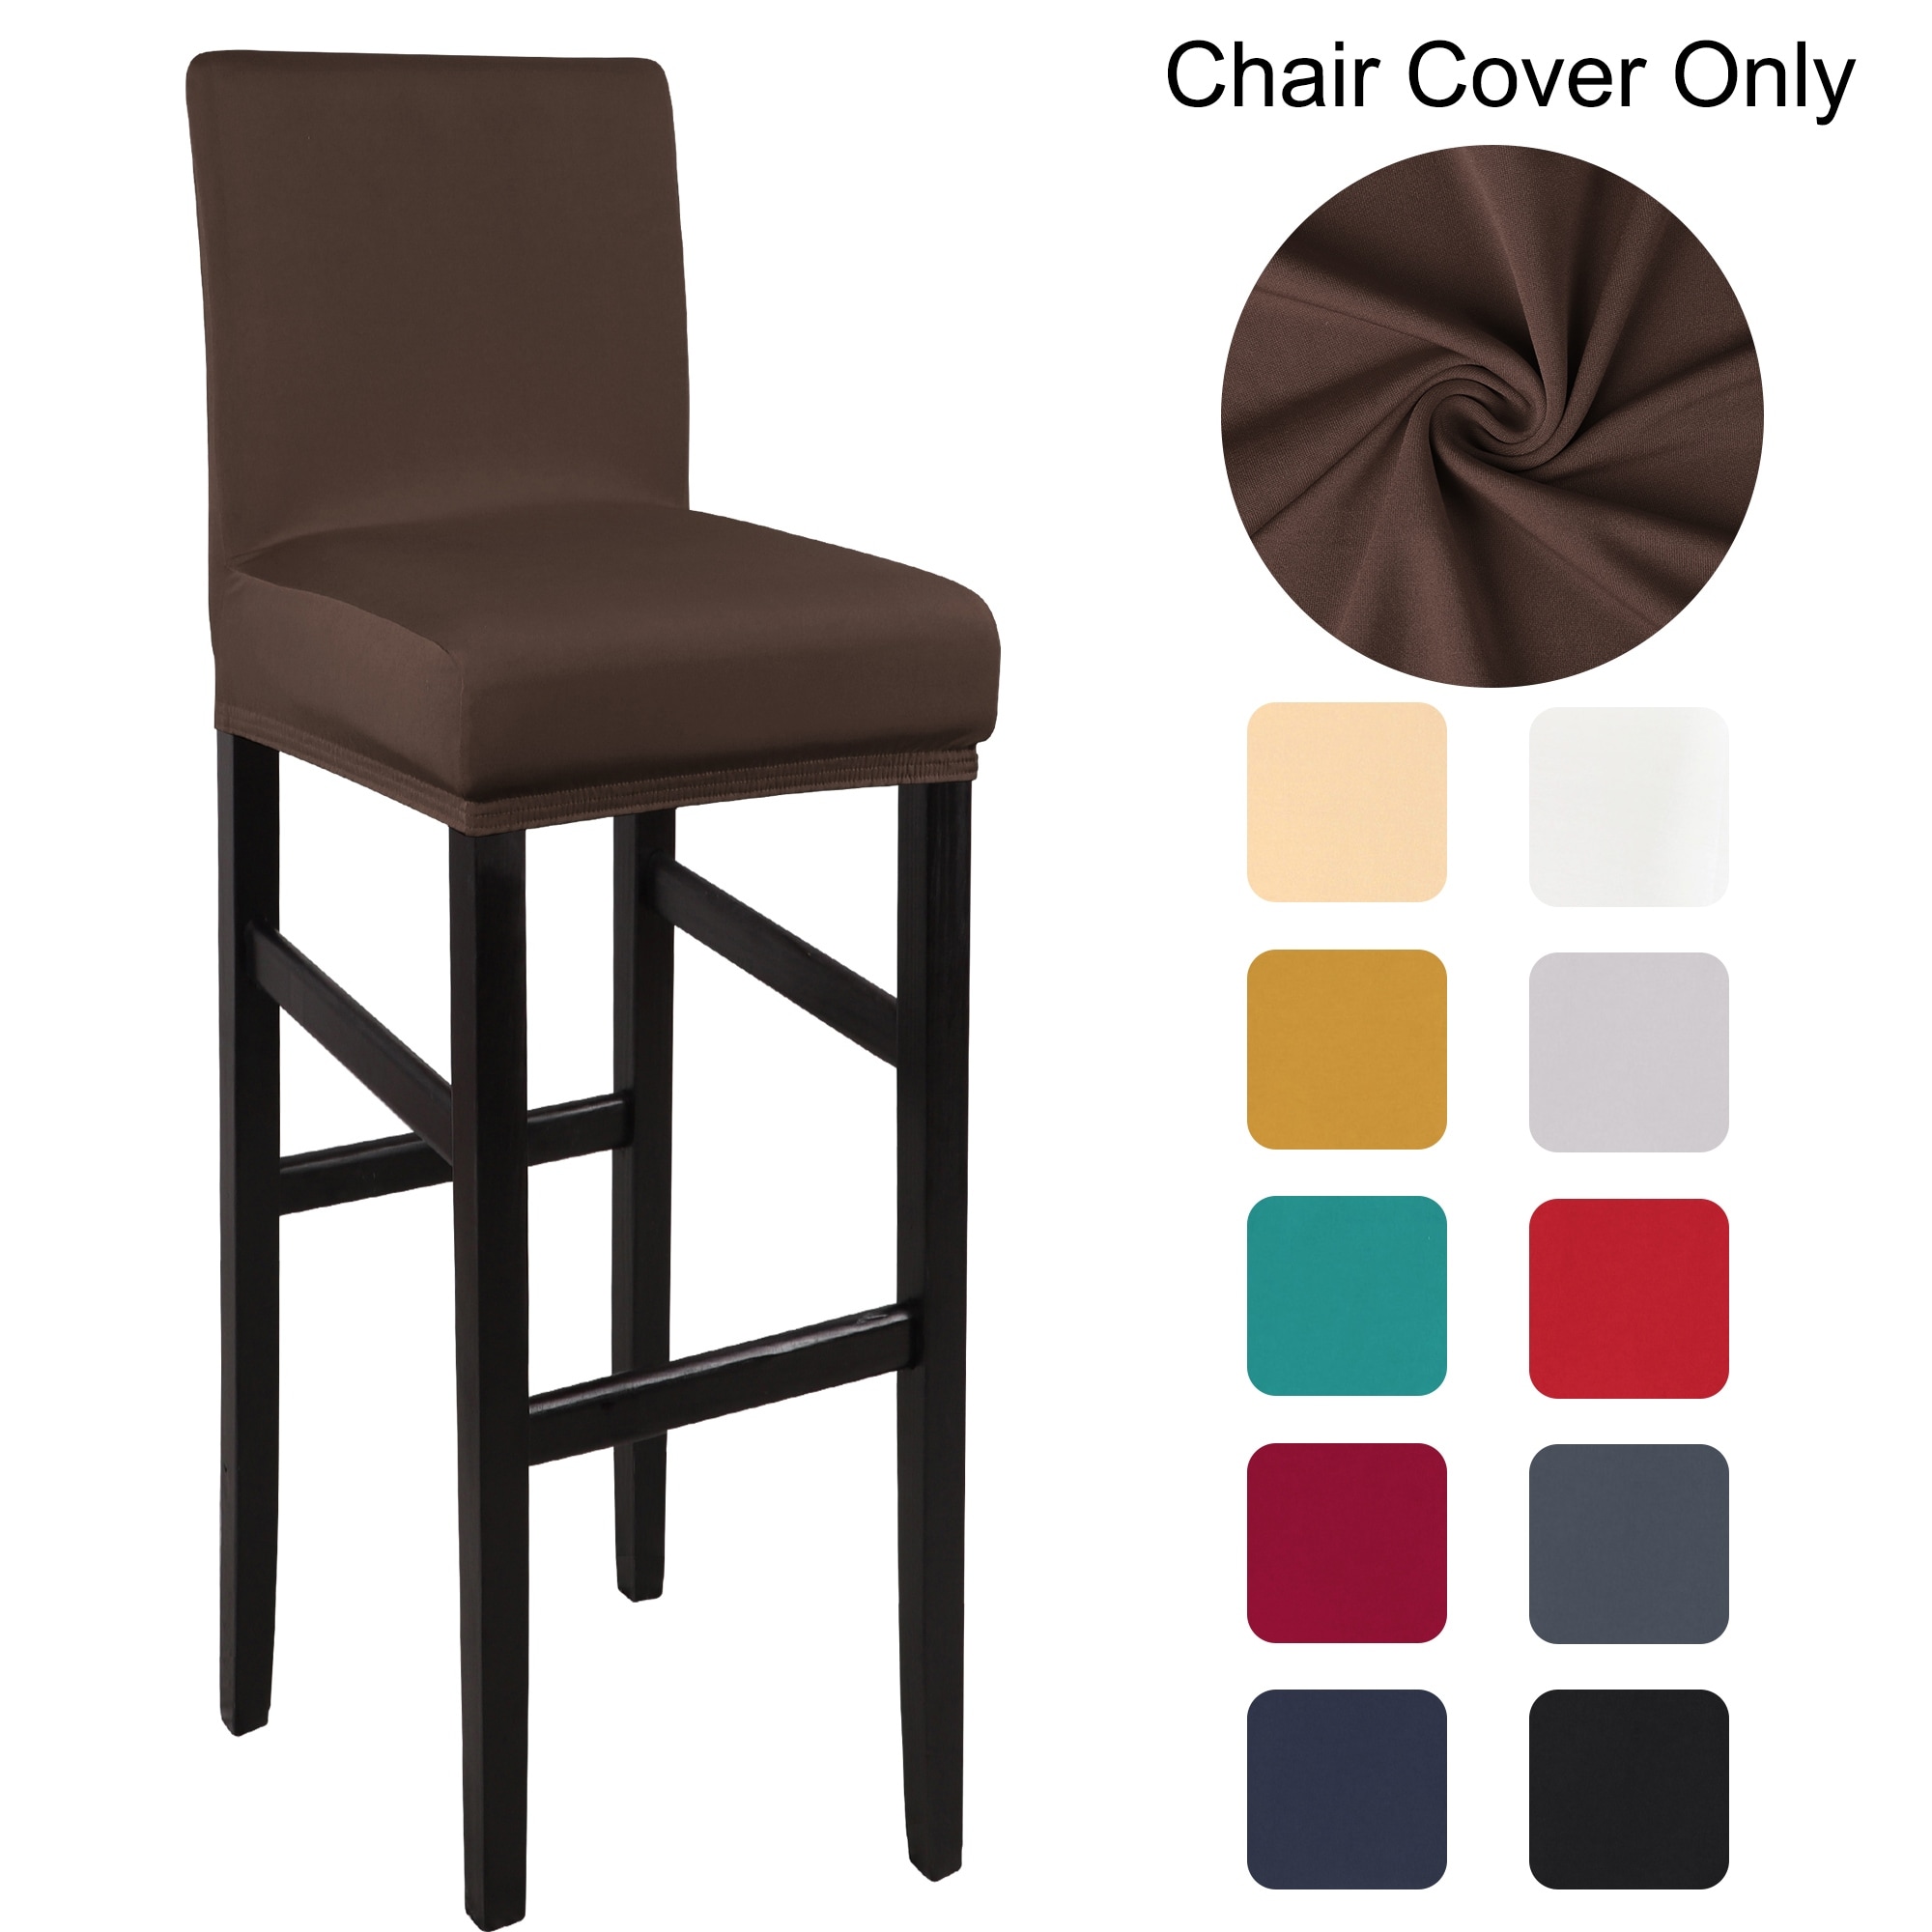 https://ak1.ostkcdn.com/images/products/is/images/direct/fdde303b567d2680e42b04cc3d6a557c978c0692/Stretch-Bar-Stool-Cover-for-Bar-Height-Side-Chair-Slipcovers.jpg